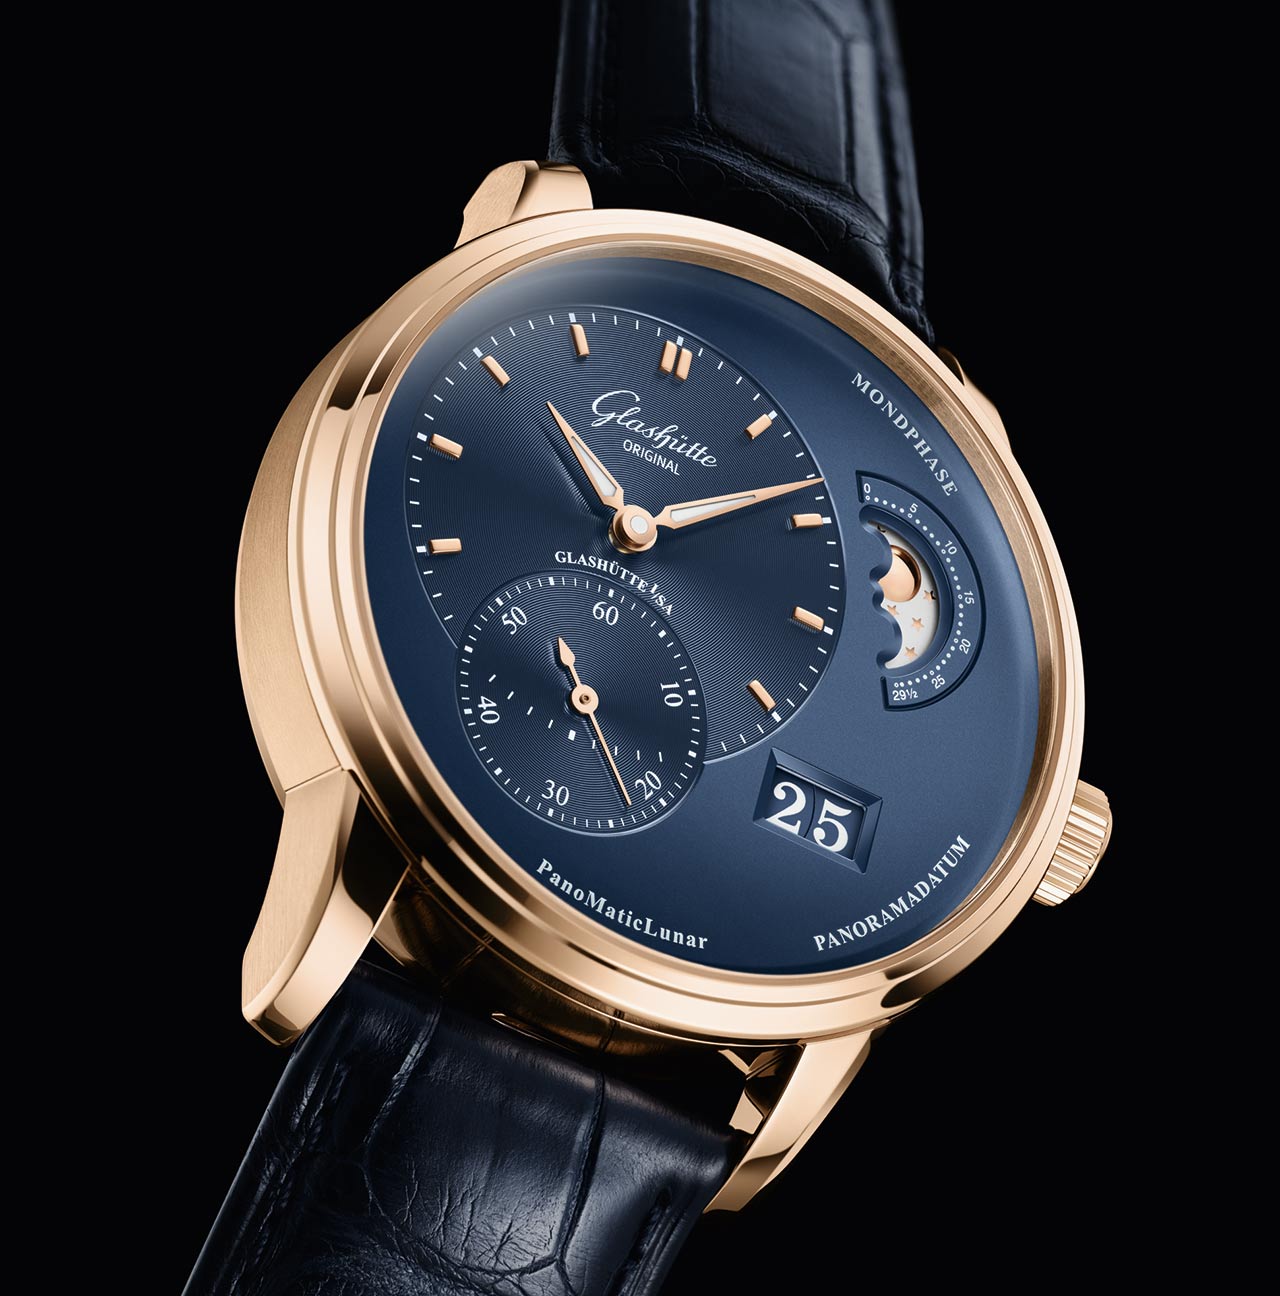 Glashütte Original - PanoReserve and PanoMaticLunar in red gold with ...